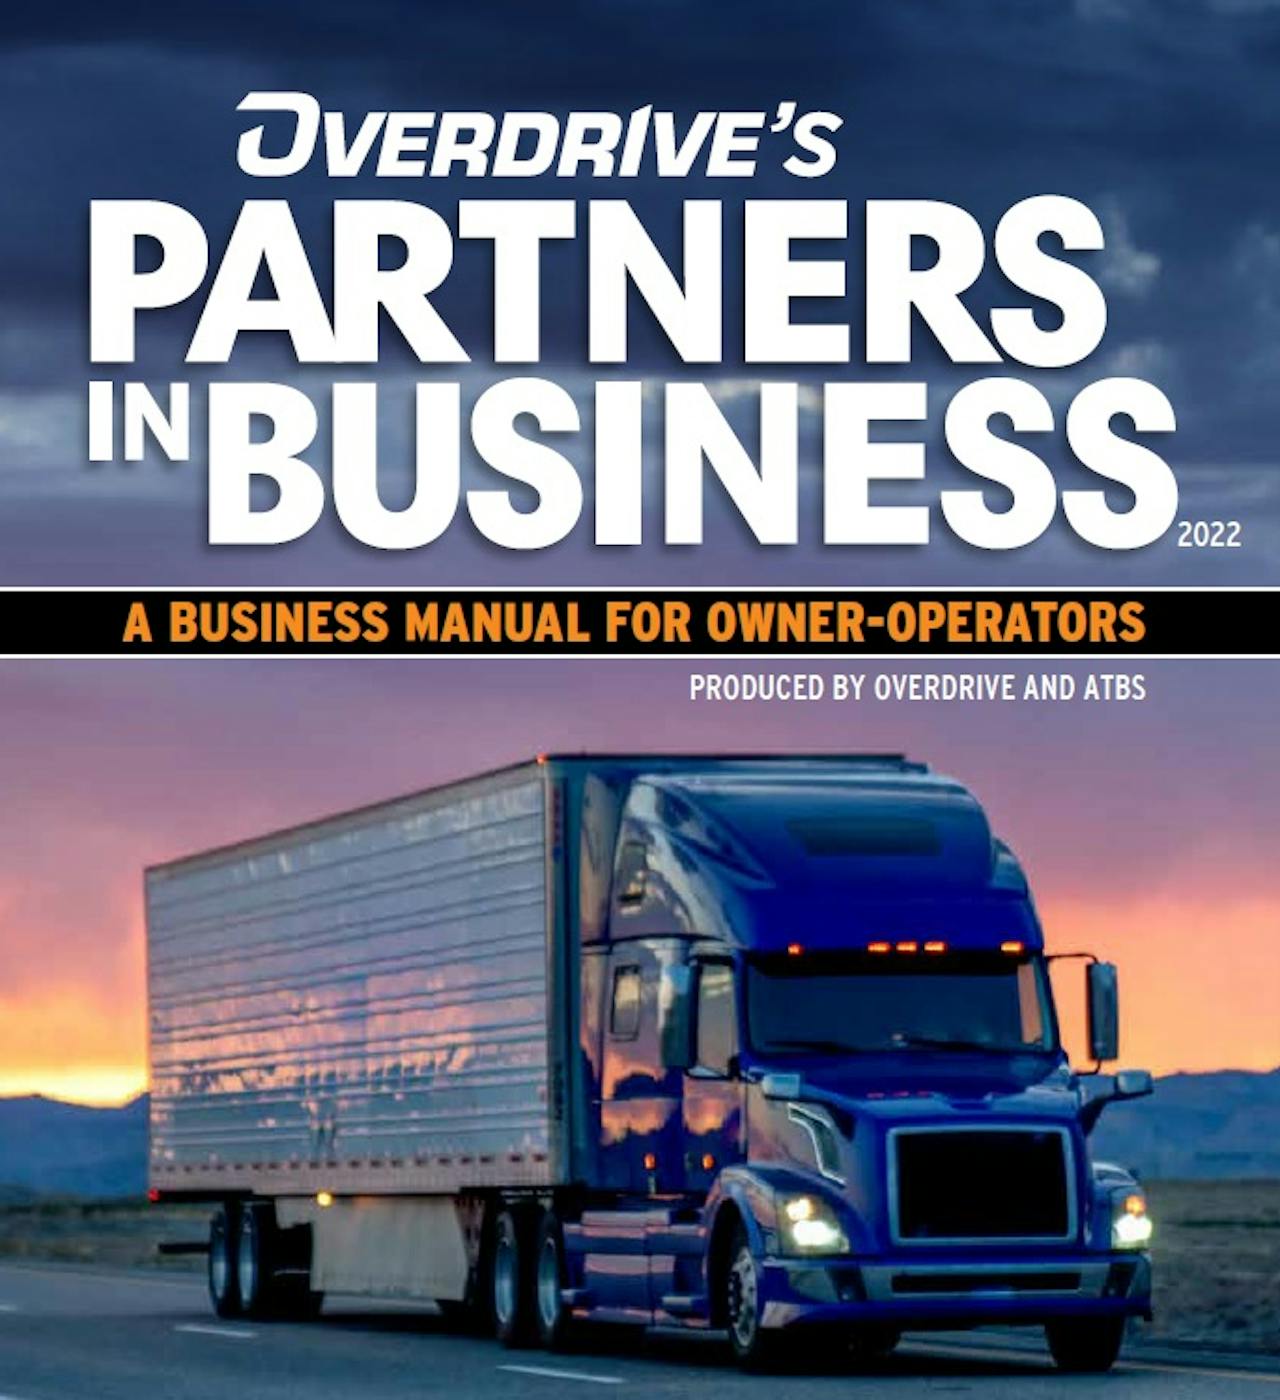 The Partners in Business session, the first in-person seminar in the long-running Overdrive/ATBS program since 2019, coincided with the release of the newly updated, interactive 2022 version of the Partners in Business manual, an in-depth business guide for owner-operators. Download the new manual via this link.